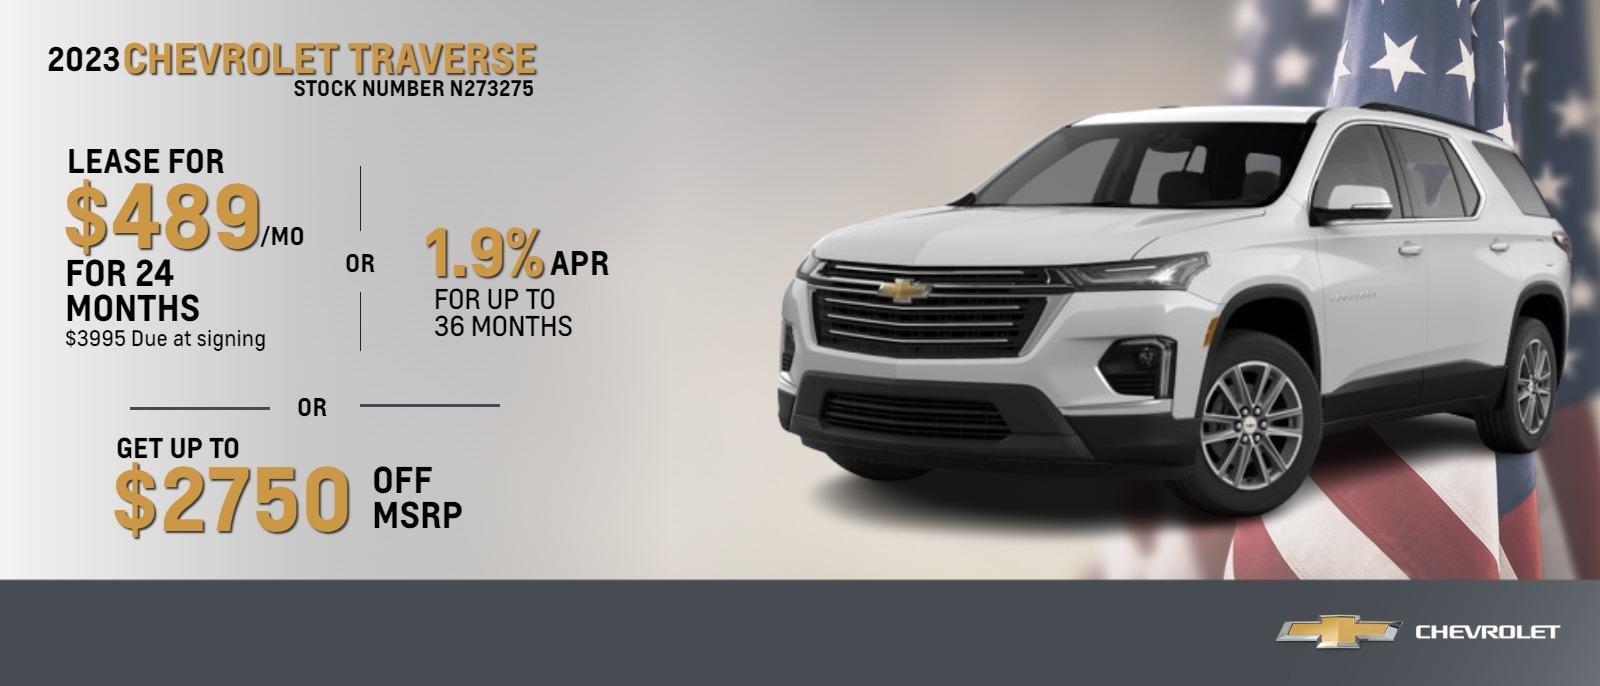 2023 Chevrolet Traverse
Leasses Start at $489 per month with $3995 out of pocket 
Get up to $2750 off 
1.9% Financing Available